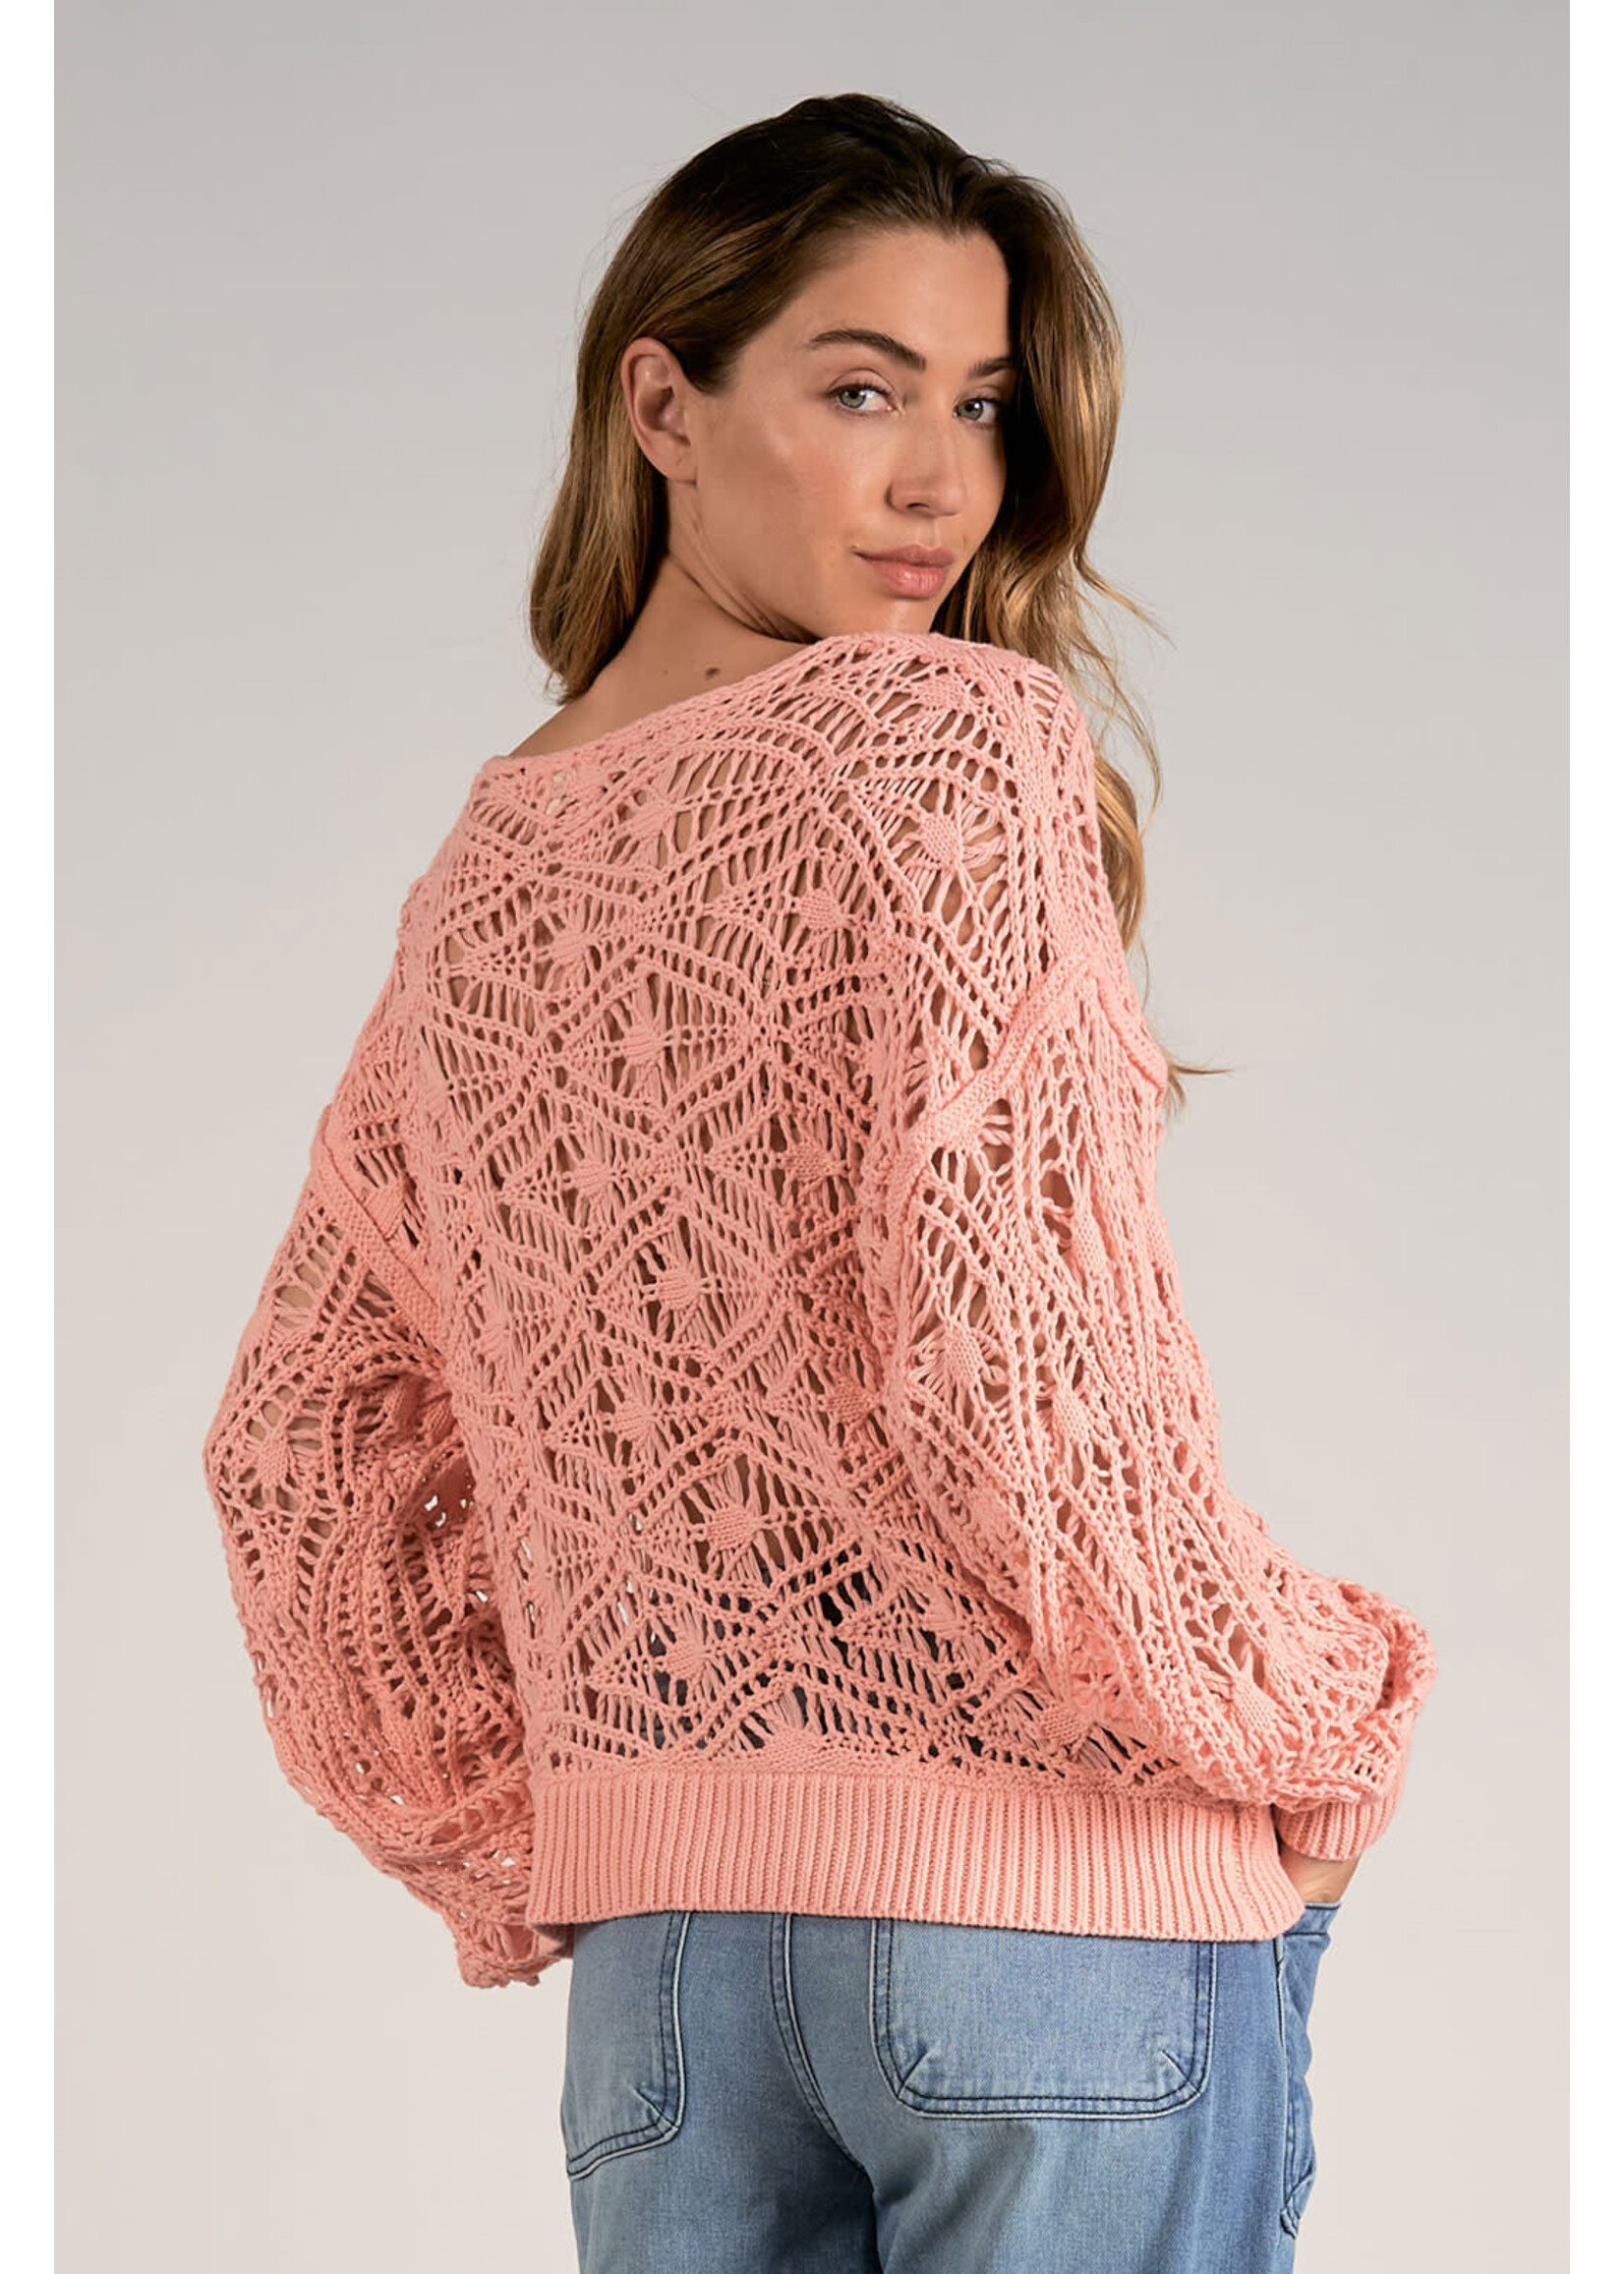 Blossom Knit Sweater